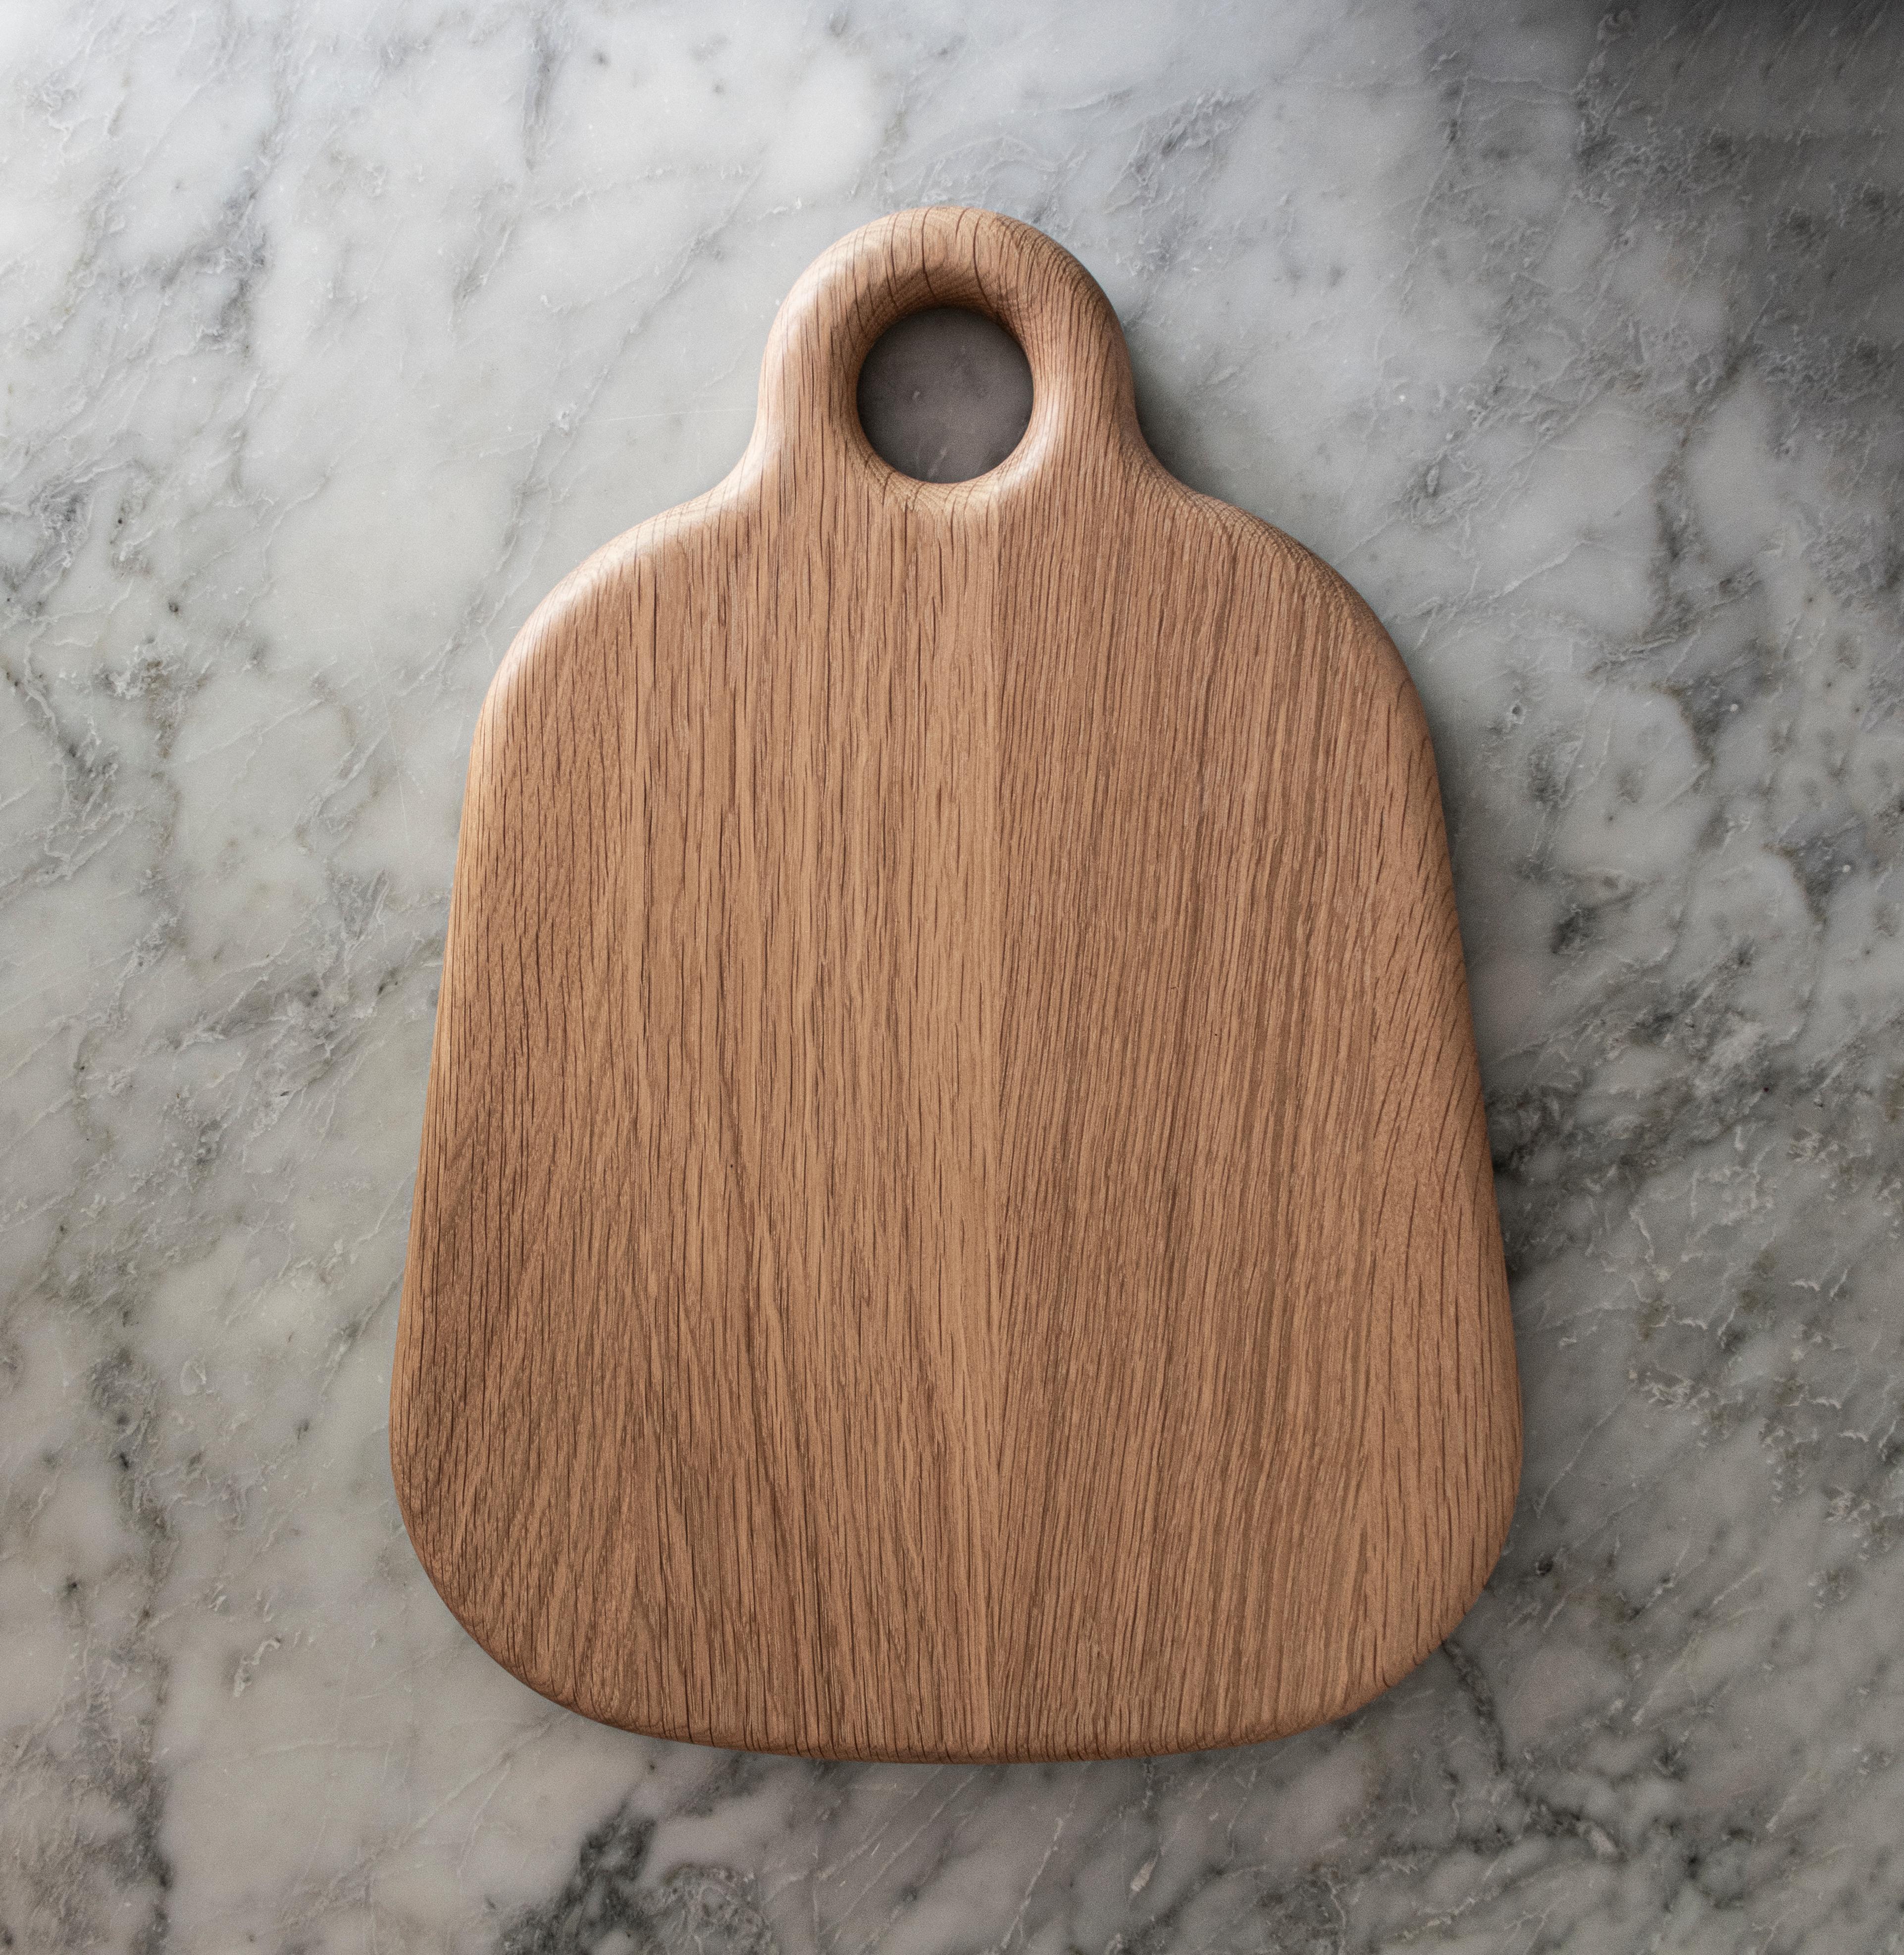 The iconic Duo Paddle has long been a staple of discerning countertops and cocktail parties. Available in classic  walnut and white oak. Stay tuned for upcoming limited editions in additional wood species..

The collection celebrates the beautiful